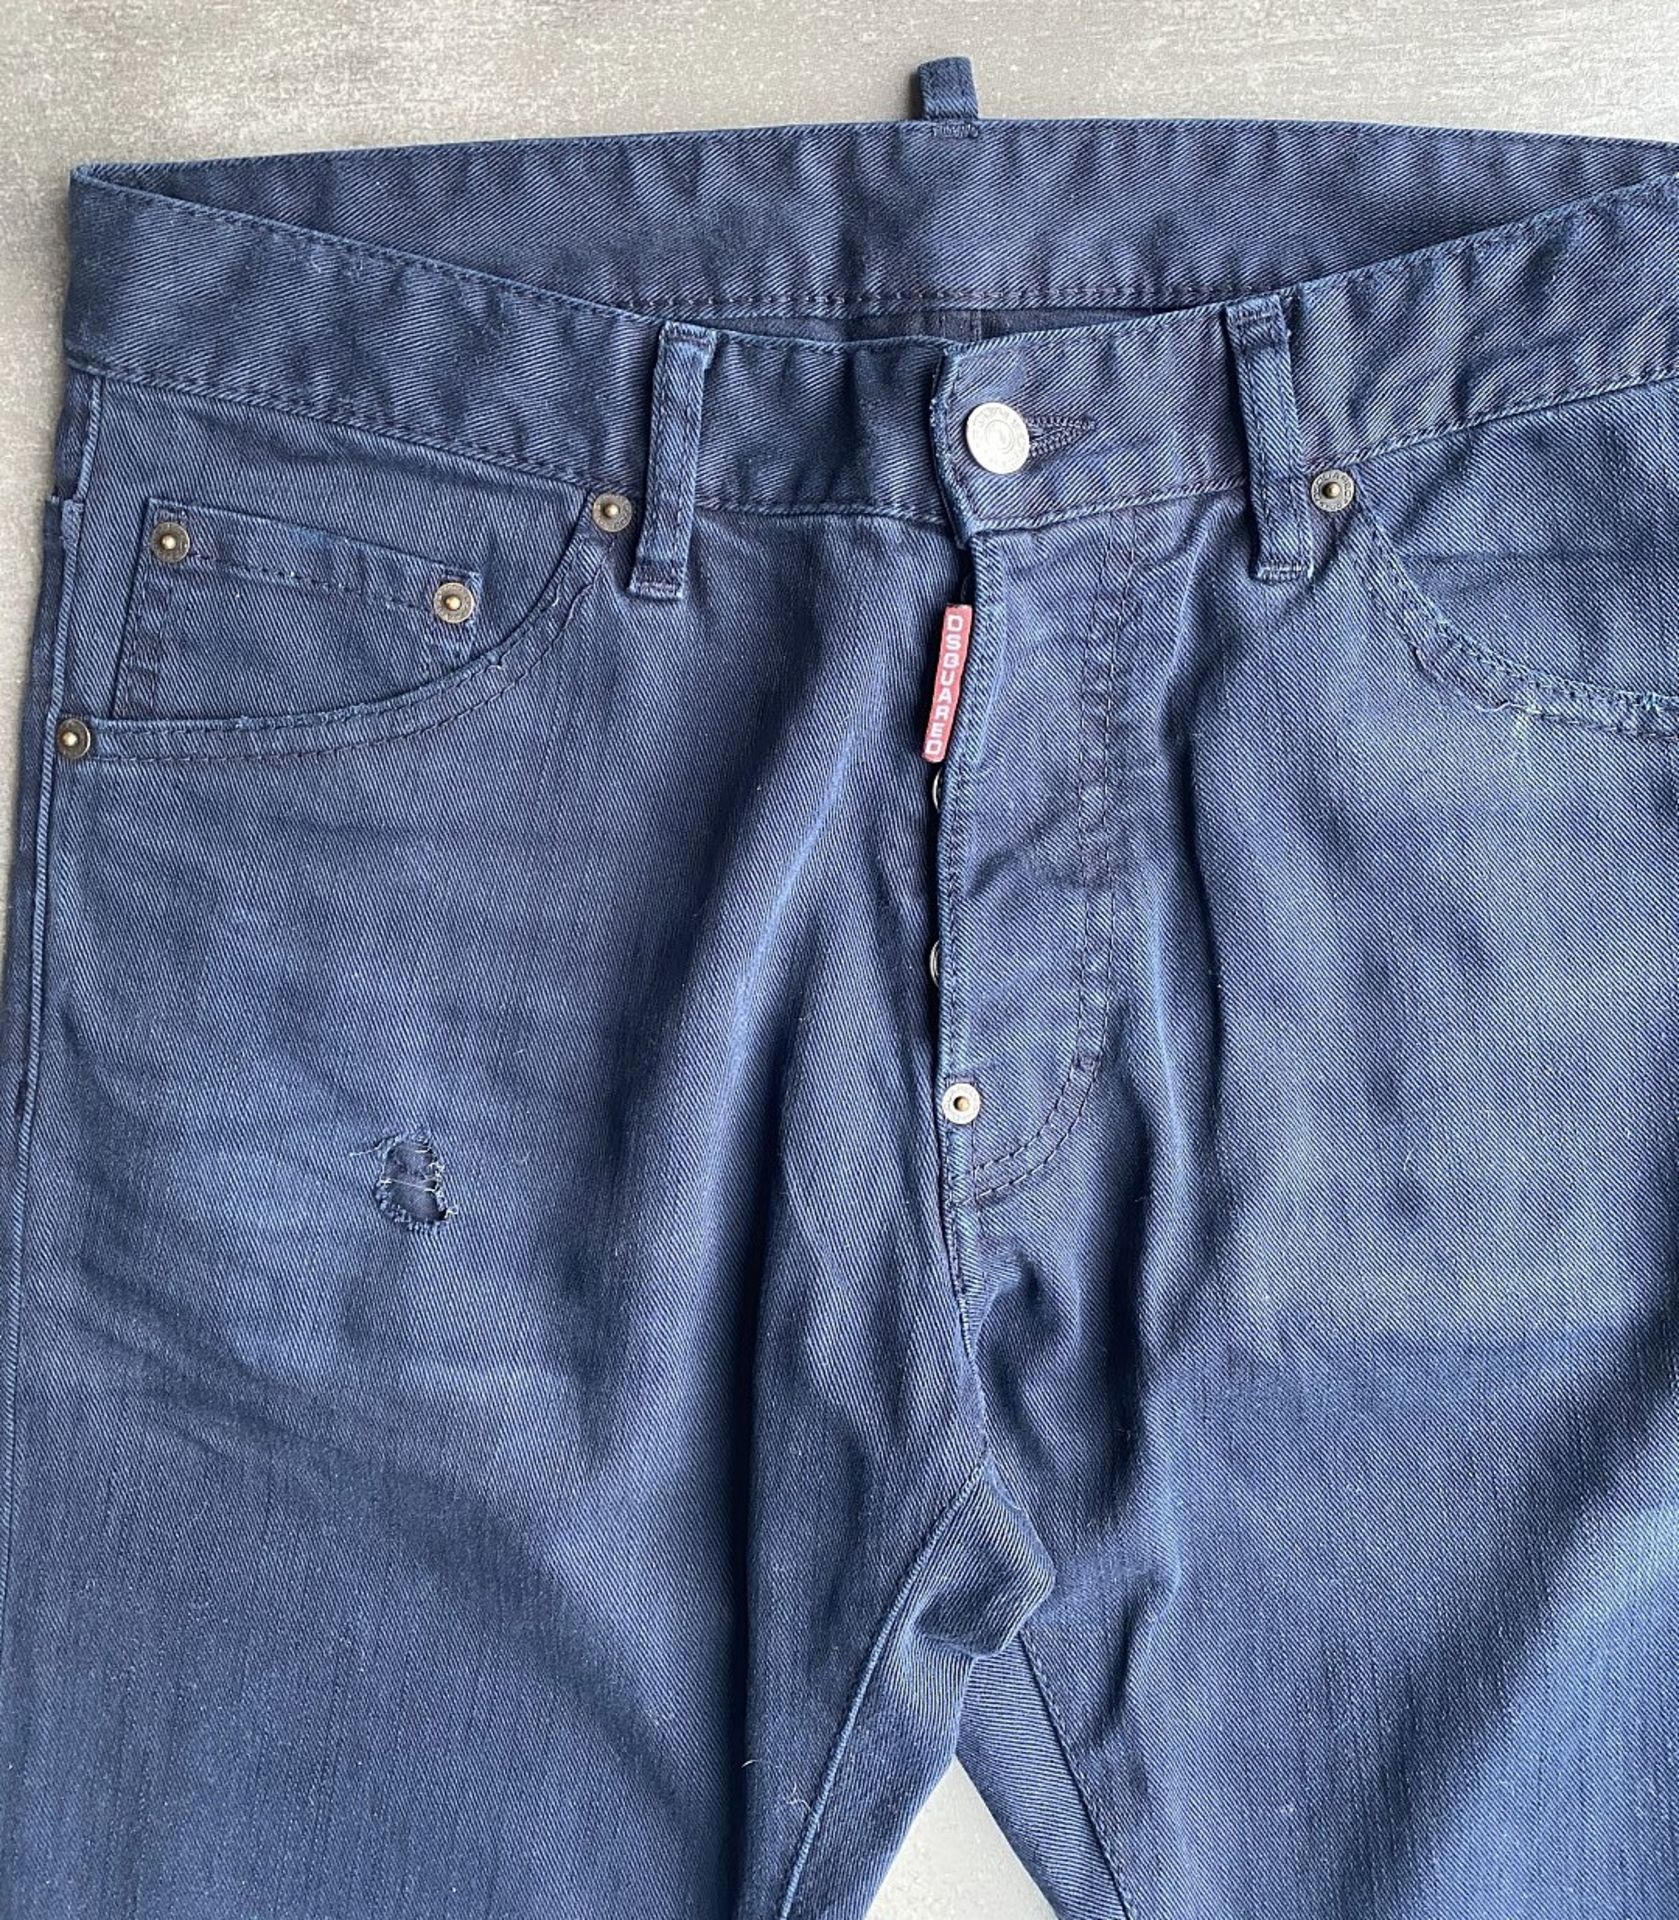 1 x Pair Of Men's Genuine Dsquared2 Designer Jeans In Navy - Waist Size: UK 30 / ITALY 46 - Preowned - Image 6 of 6